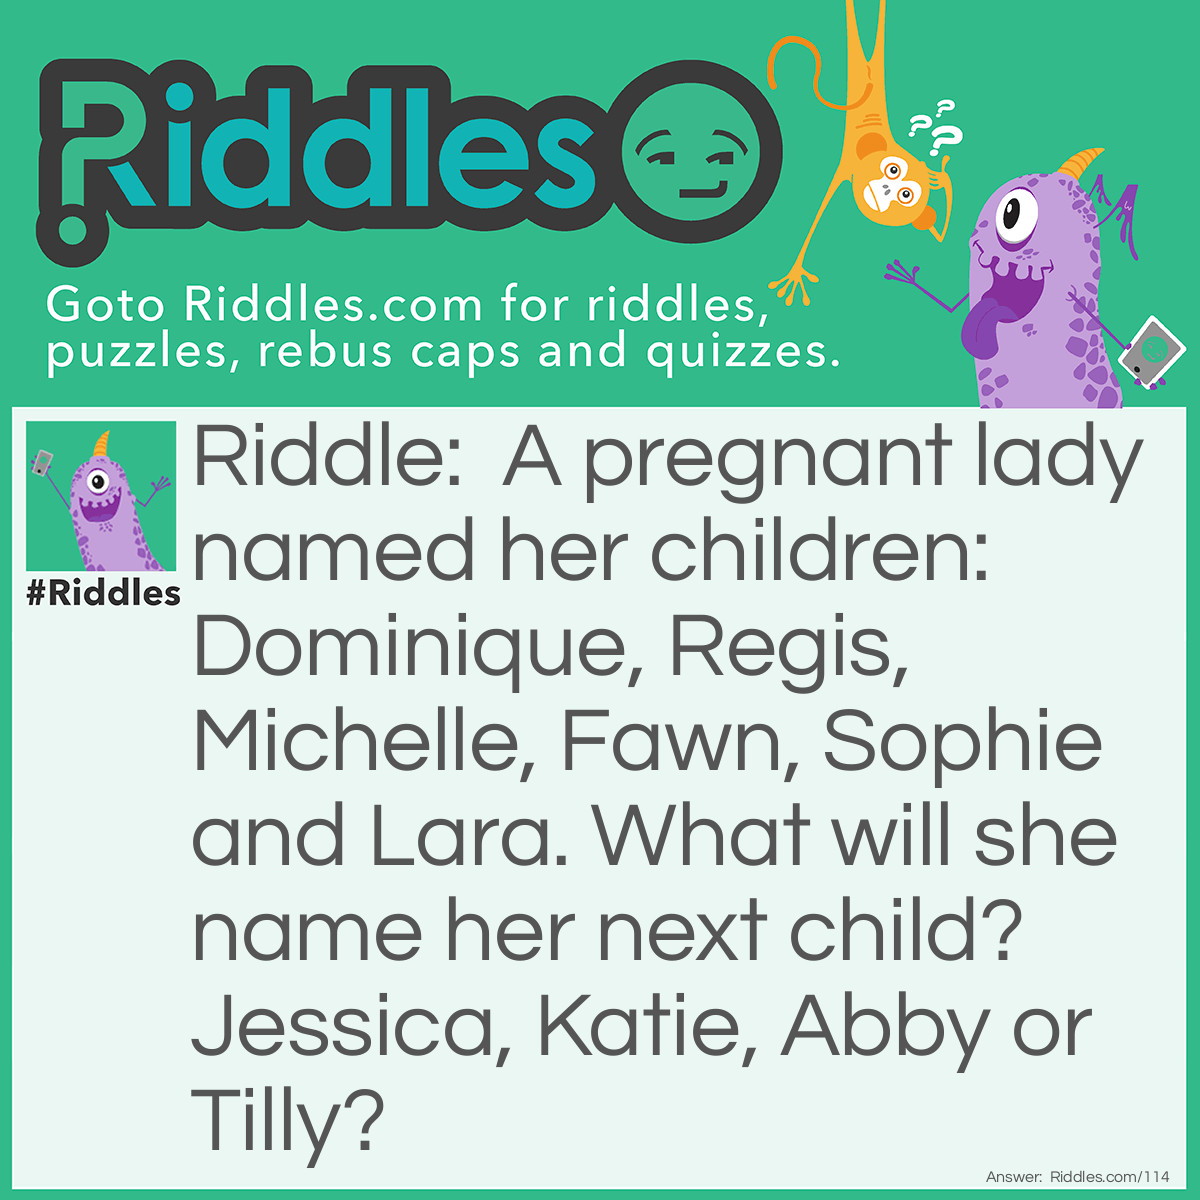 Riddle: A pregnant lady named her children: Dominique, Regis, Michelle, Fawn, Sophie and Lara. What will she name her next child? Jessica, Katie, Abby or Tilly? Answer: Tilly. She seems to follow the scale Do, Re, Me, Fa, So, La, and then Ti.